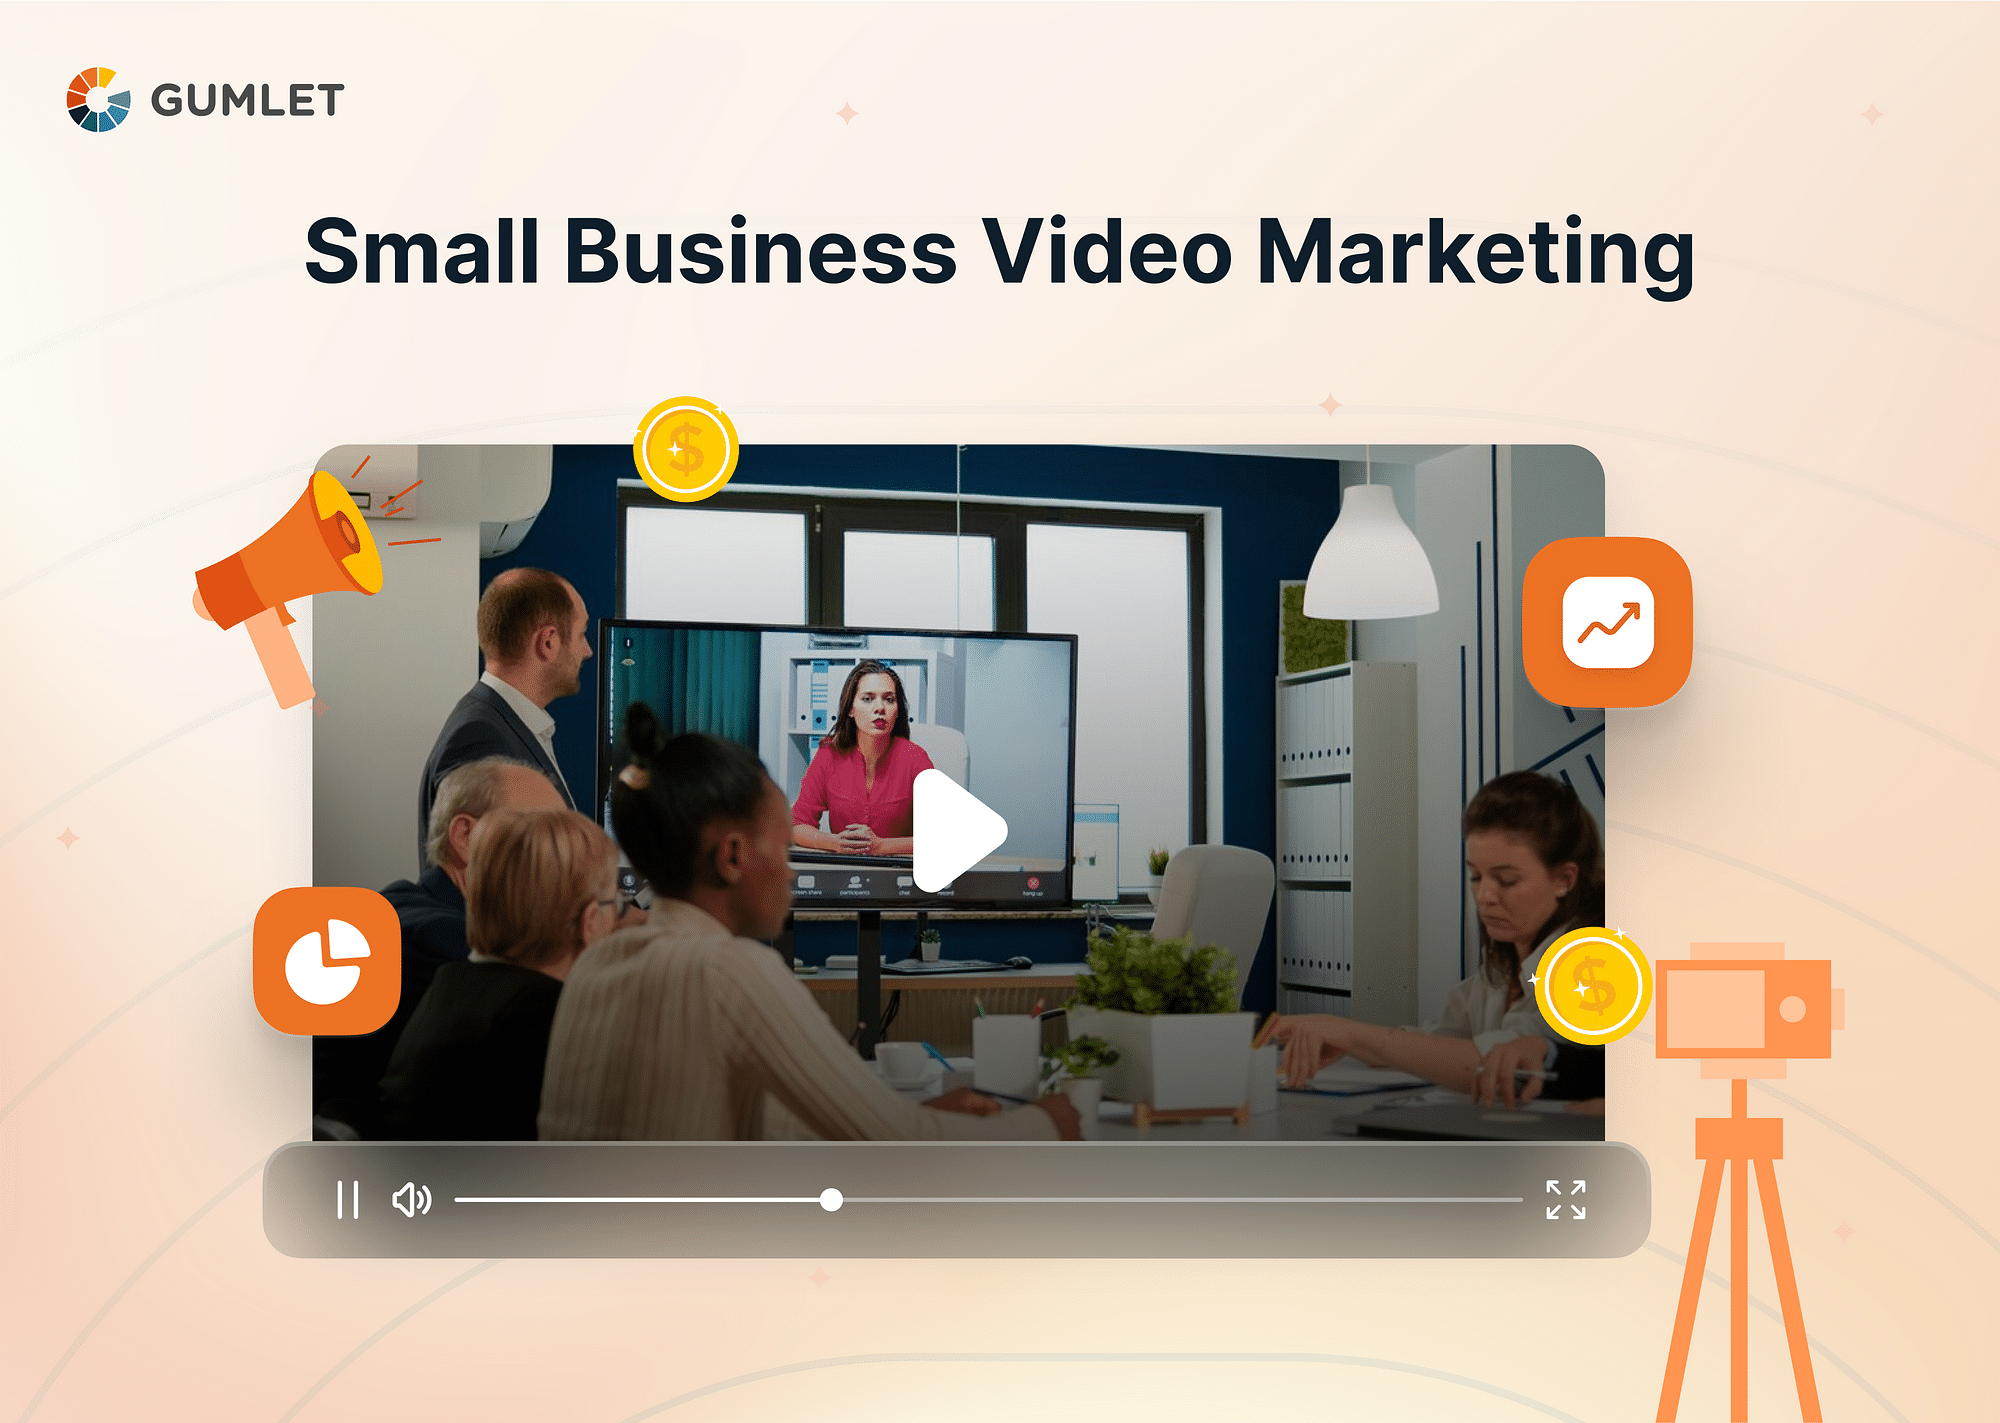 How to ace Video marketing for your Small Business?